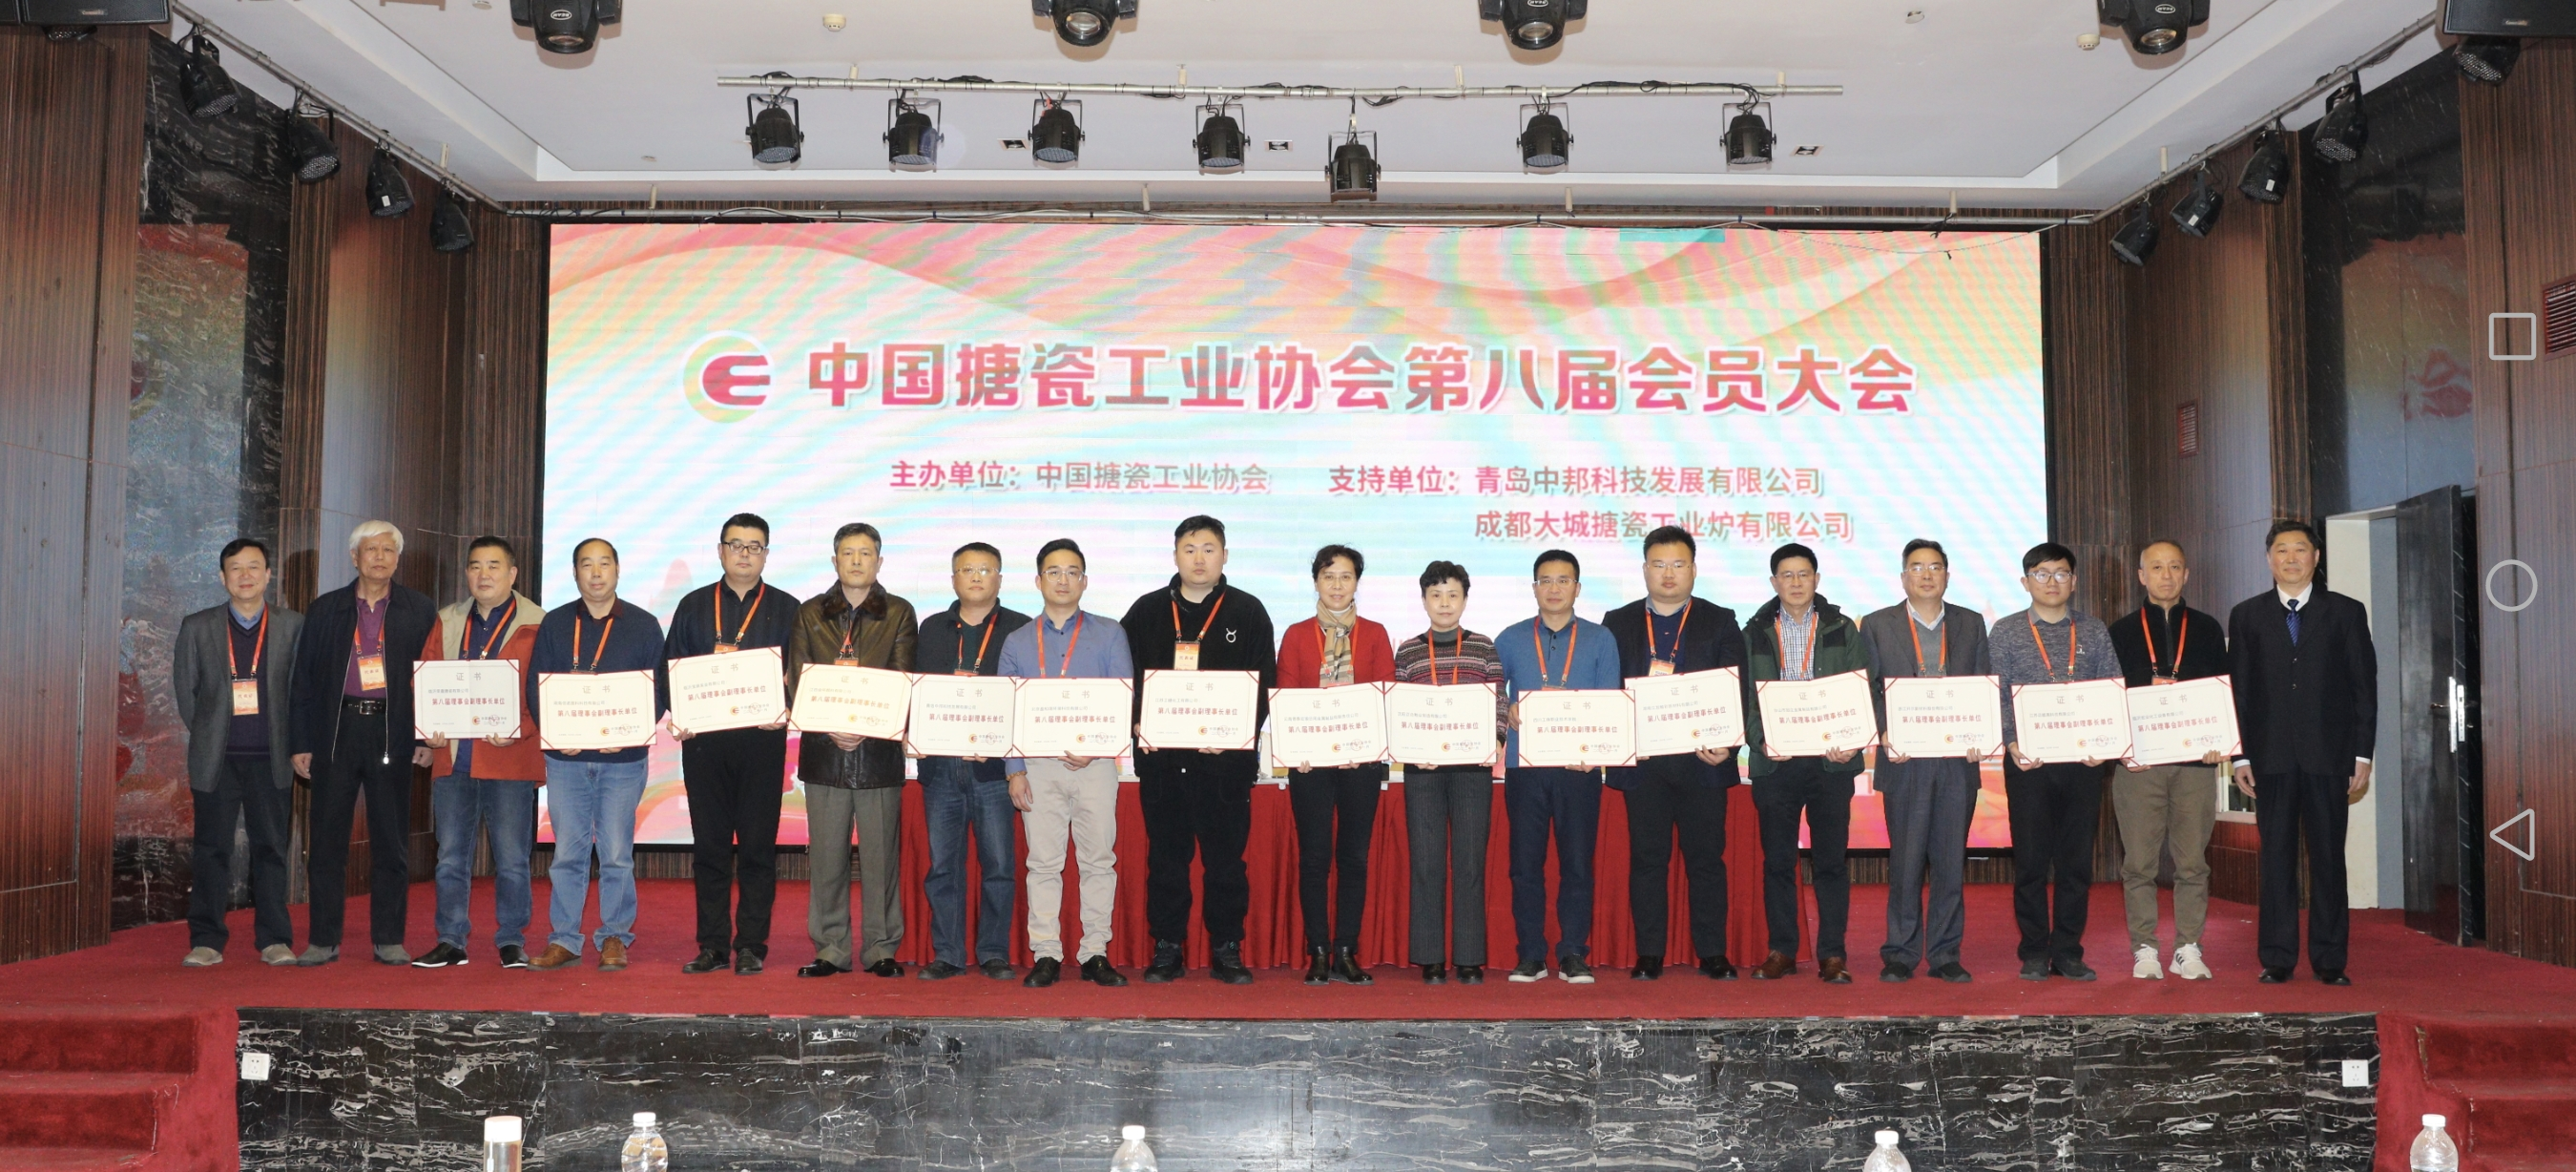 YHR was invited to participate in the 8th Member Conference of China Enamel Industry Association